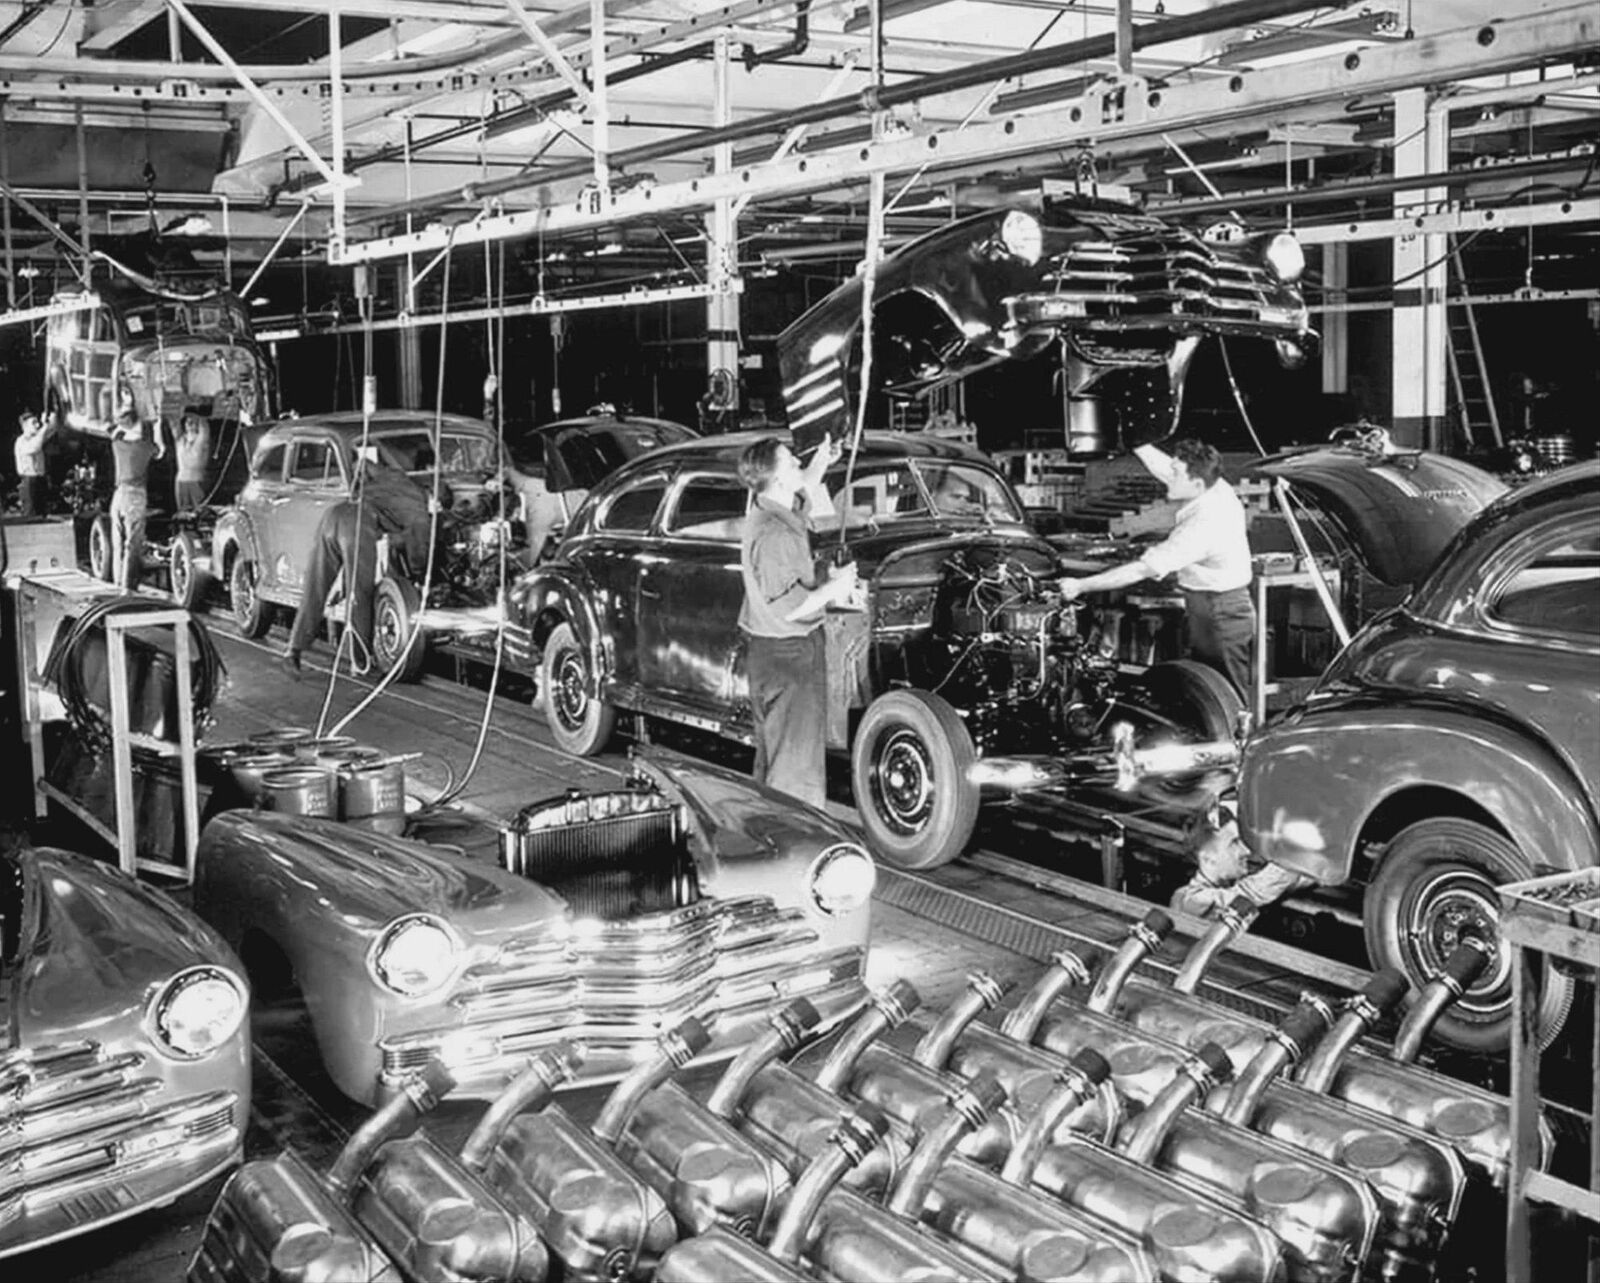 1947 CHEVROLET ASSEMBLY LINE PHOTO  (224-T)